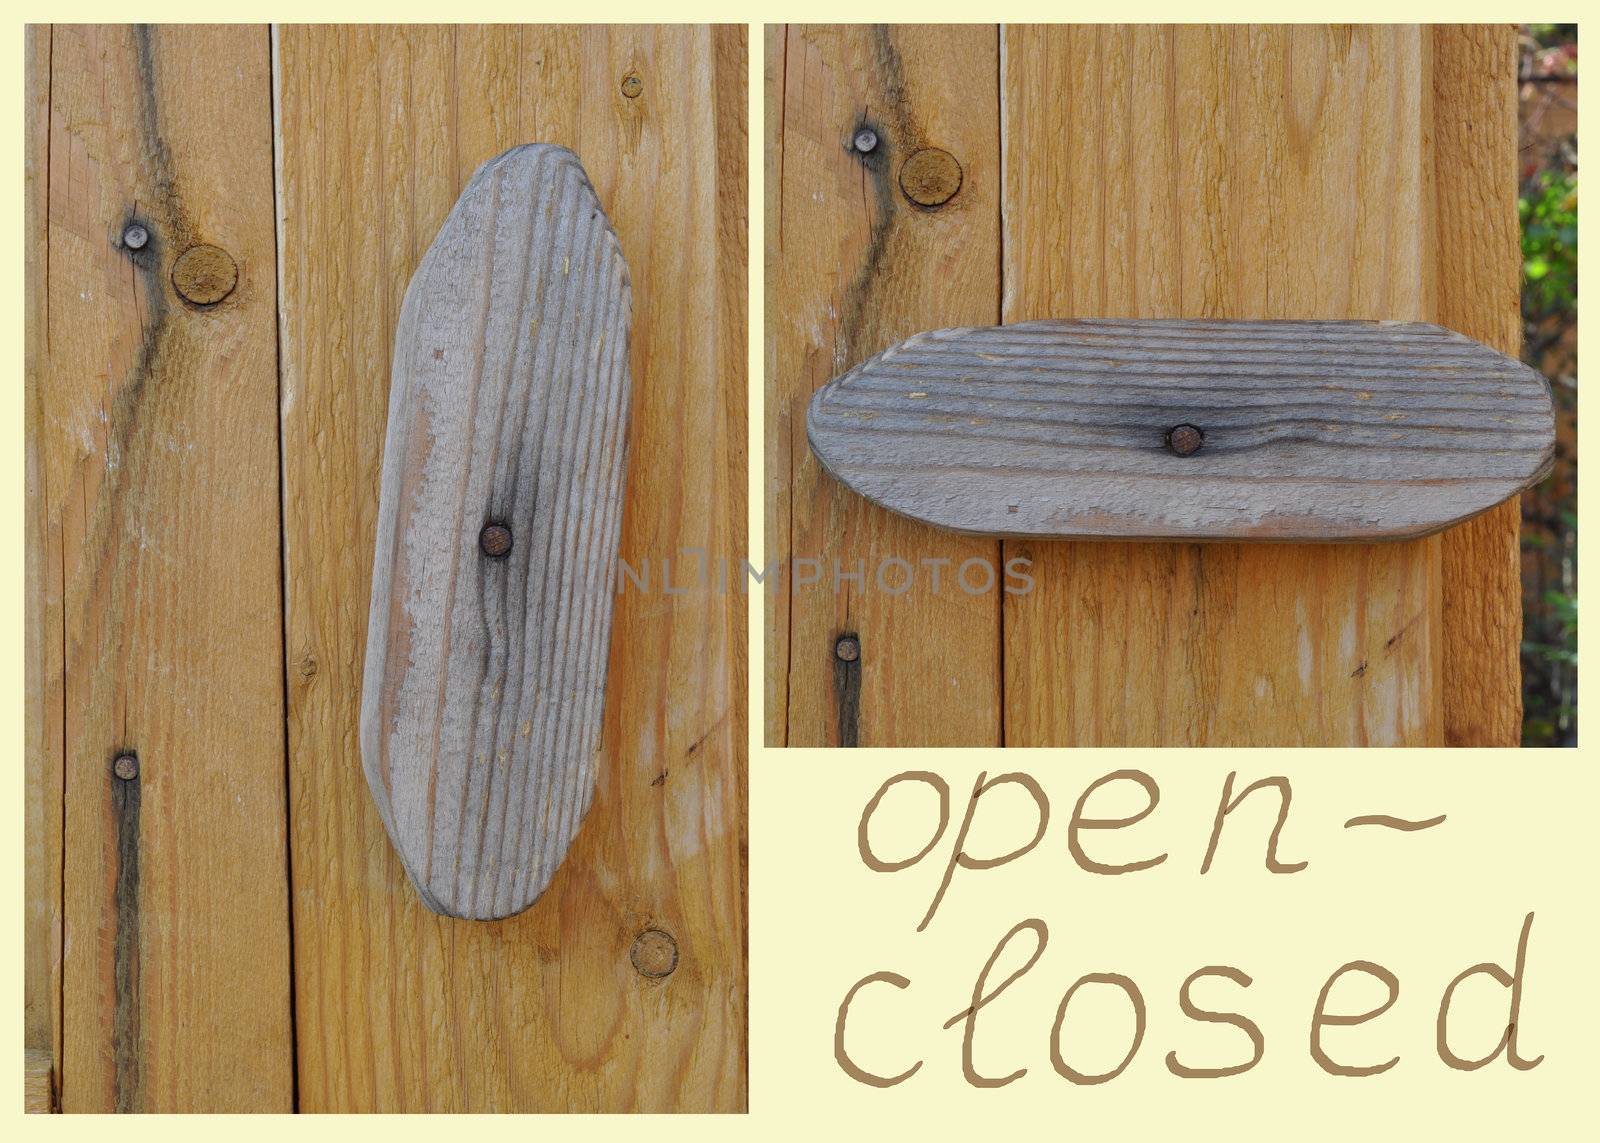 Open - closed: a wooden country door with a rotating wooden lock